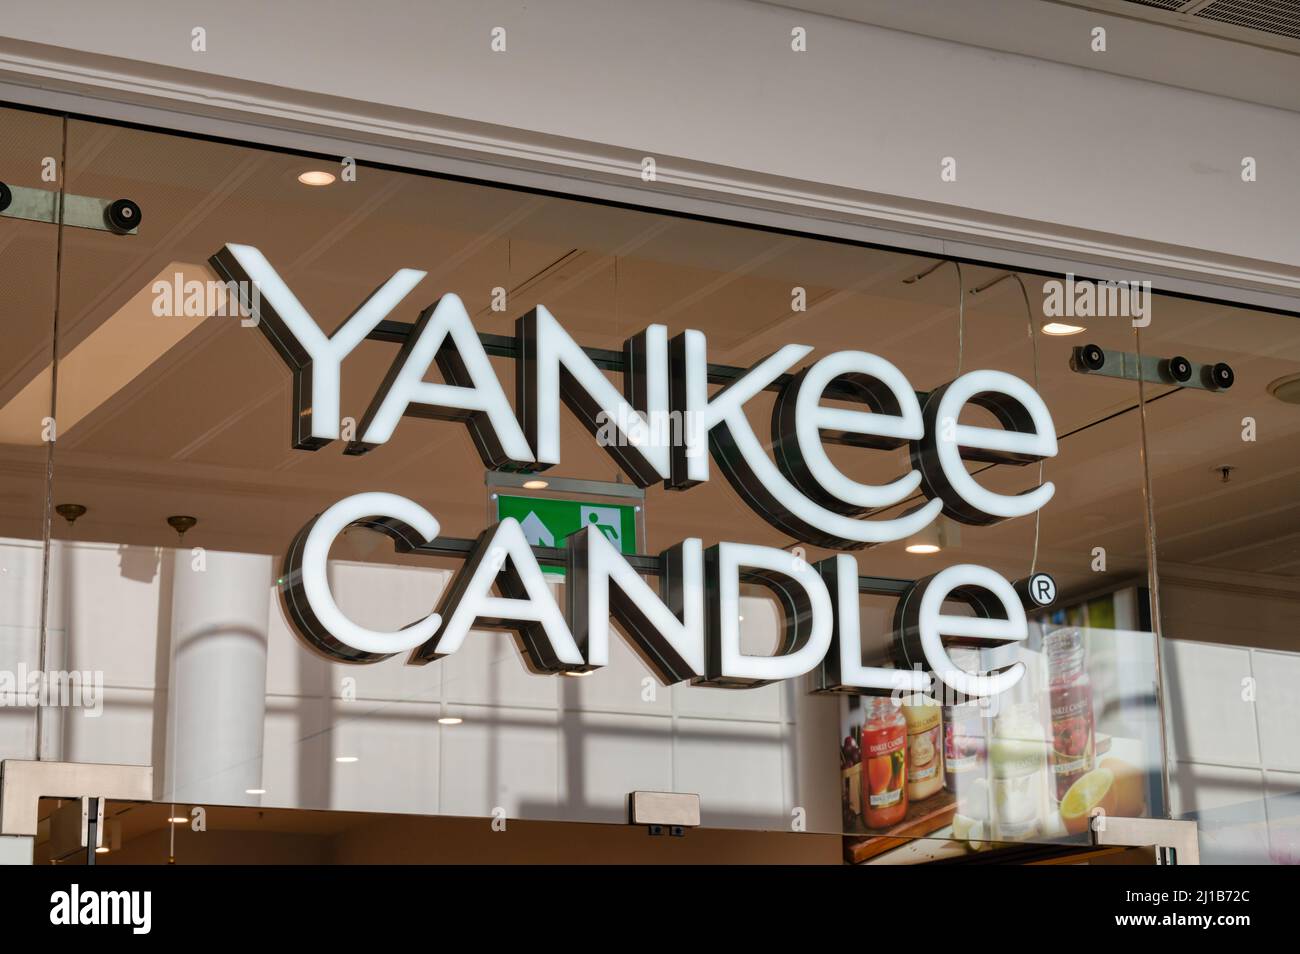 Belfast, UK- Feb 21, 2022:The sign for Yankee Candle in Belfast Northern Ireland. Stock Photo